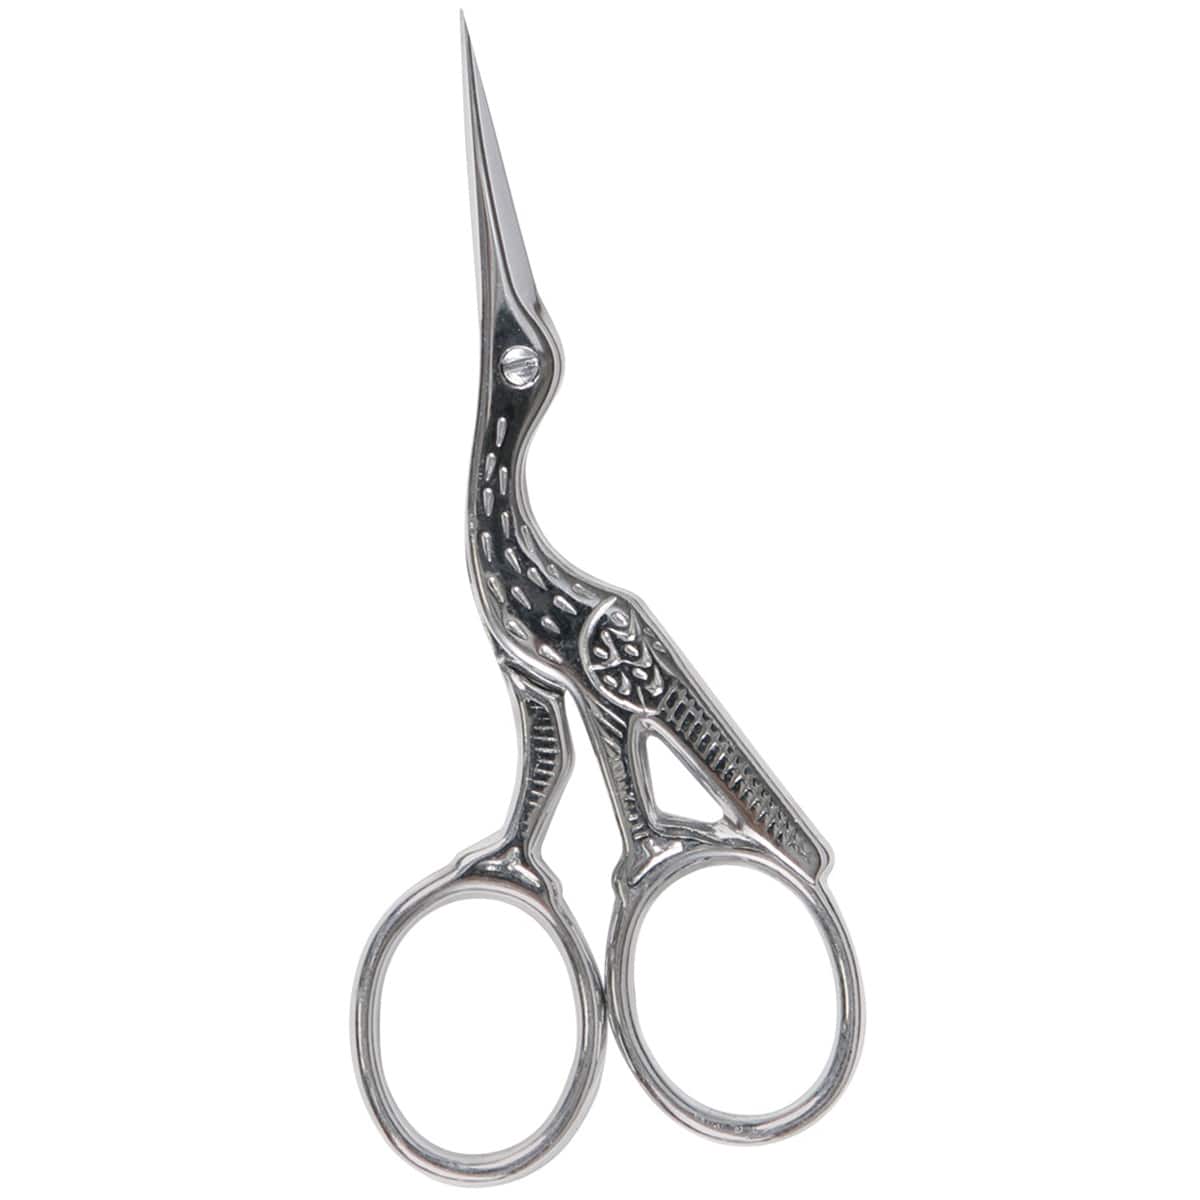 Robust Hot Scissors for Fabric For Making Garments 